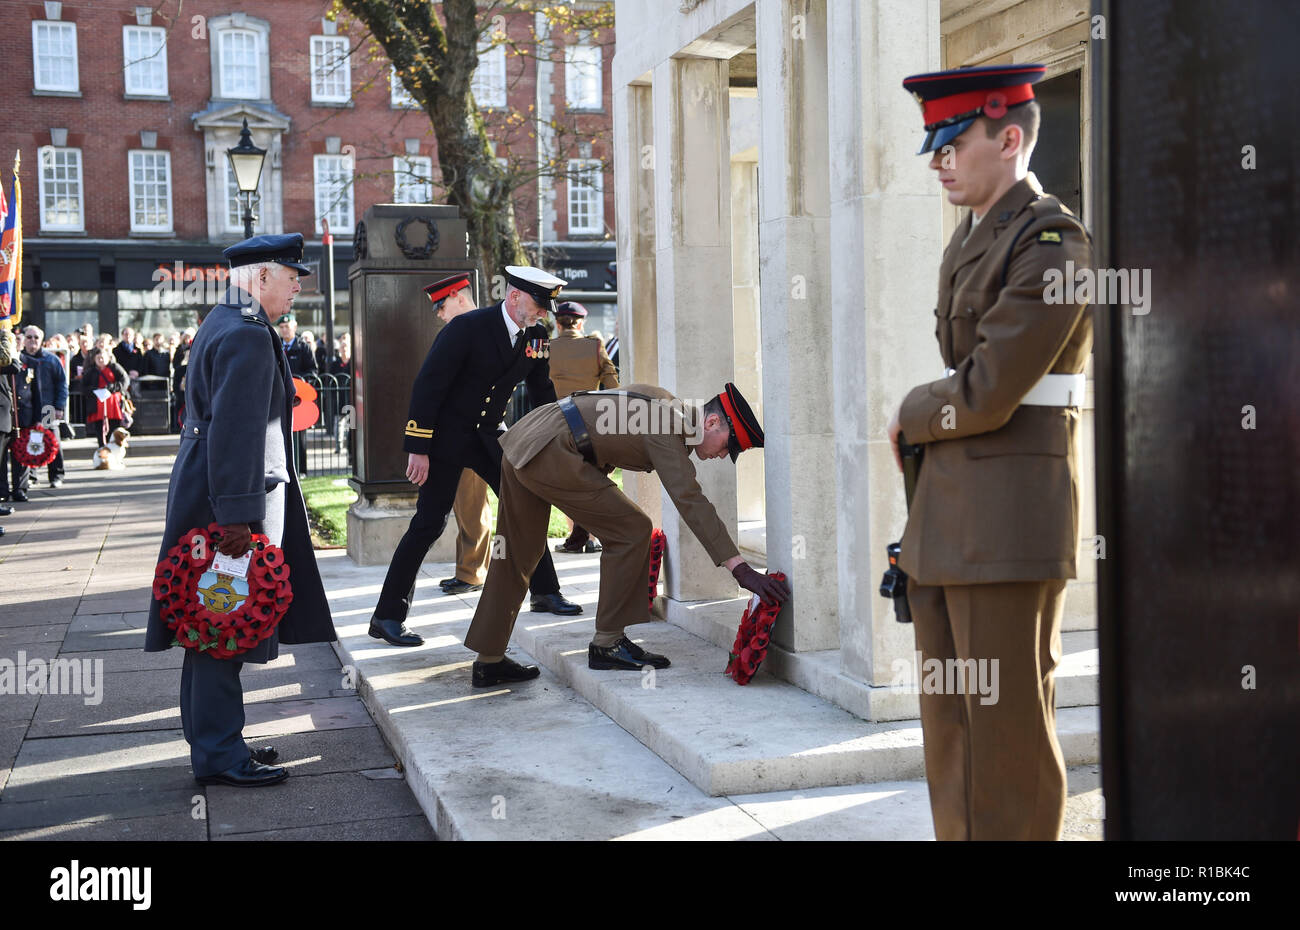 Brighton UK 11th November 2018 - Wreaths are laid at the Act of Remembrance Service held at Brighton war memorial . It is the 100 year anniversary today of the ending of World War One on the 11th November 1918 . Photograph taken by Simon Dack Credit: Simon Dack/Alamy Live News Stock Photo